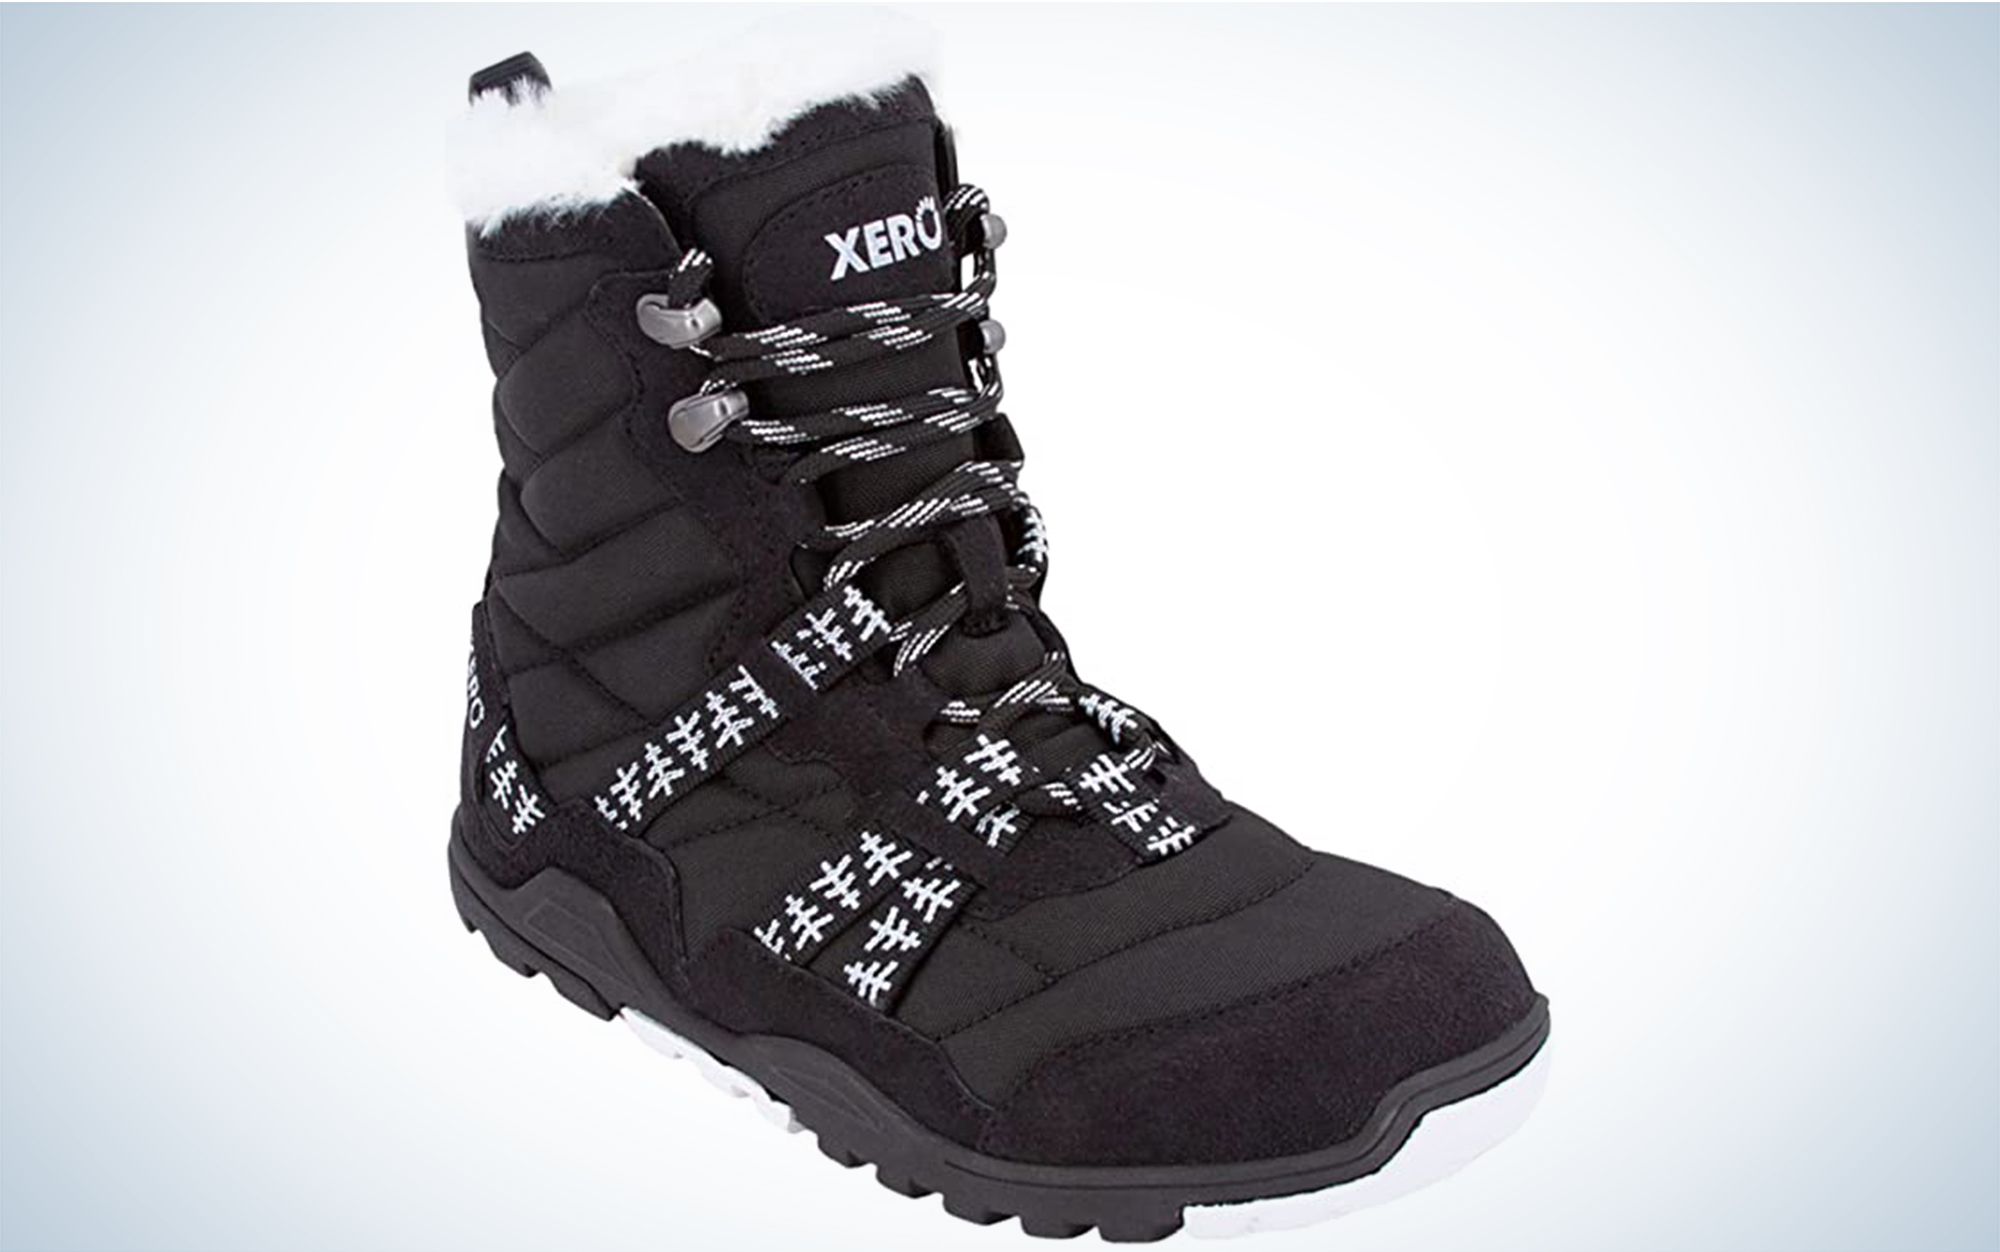 The Xero Shoes Alpine are the best minimalist hiking boots for snow.